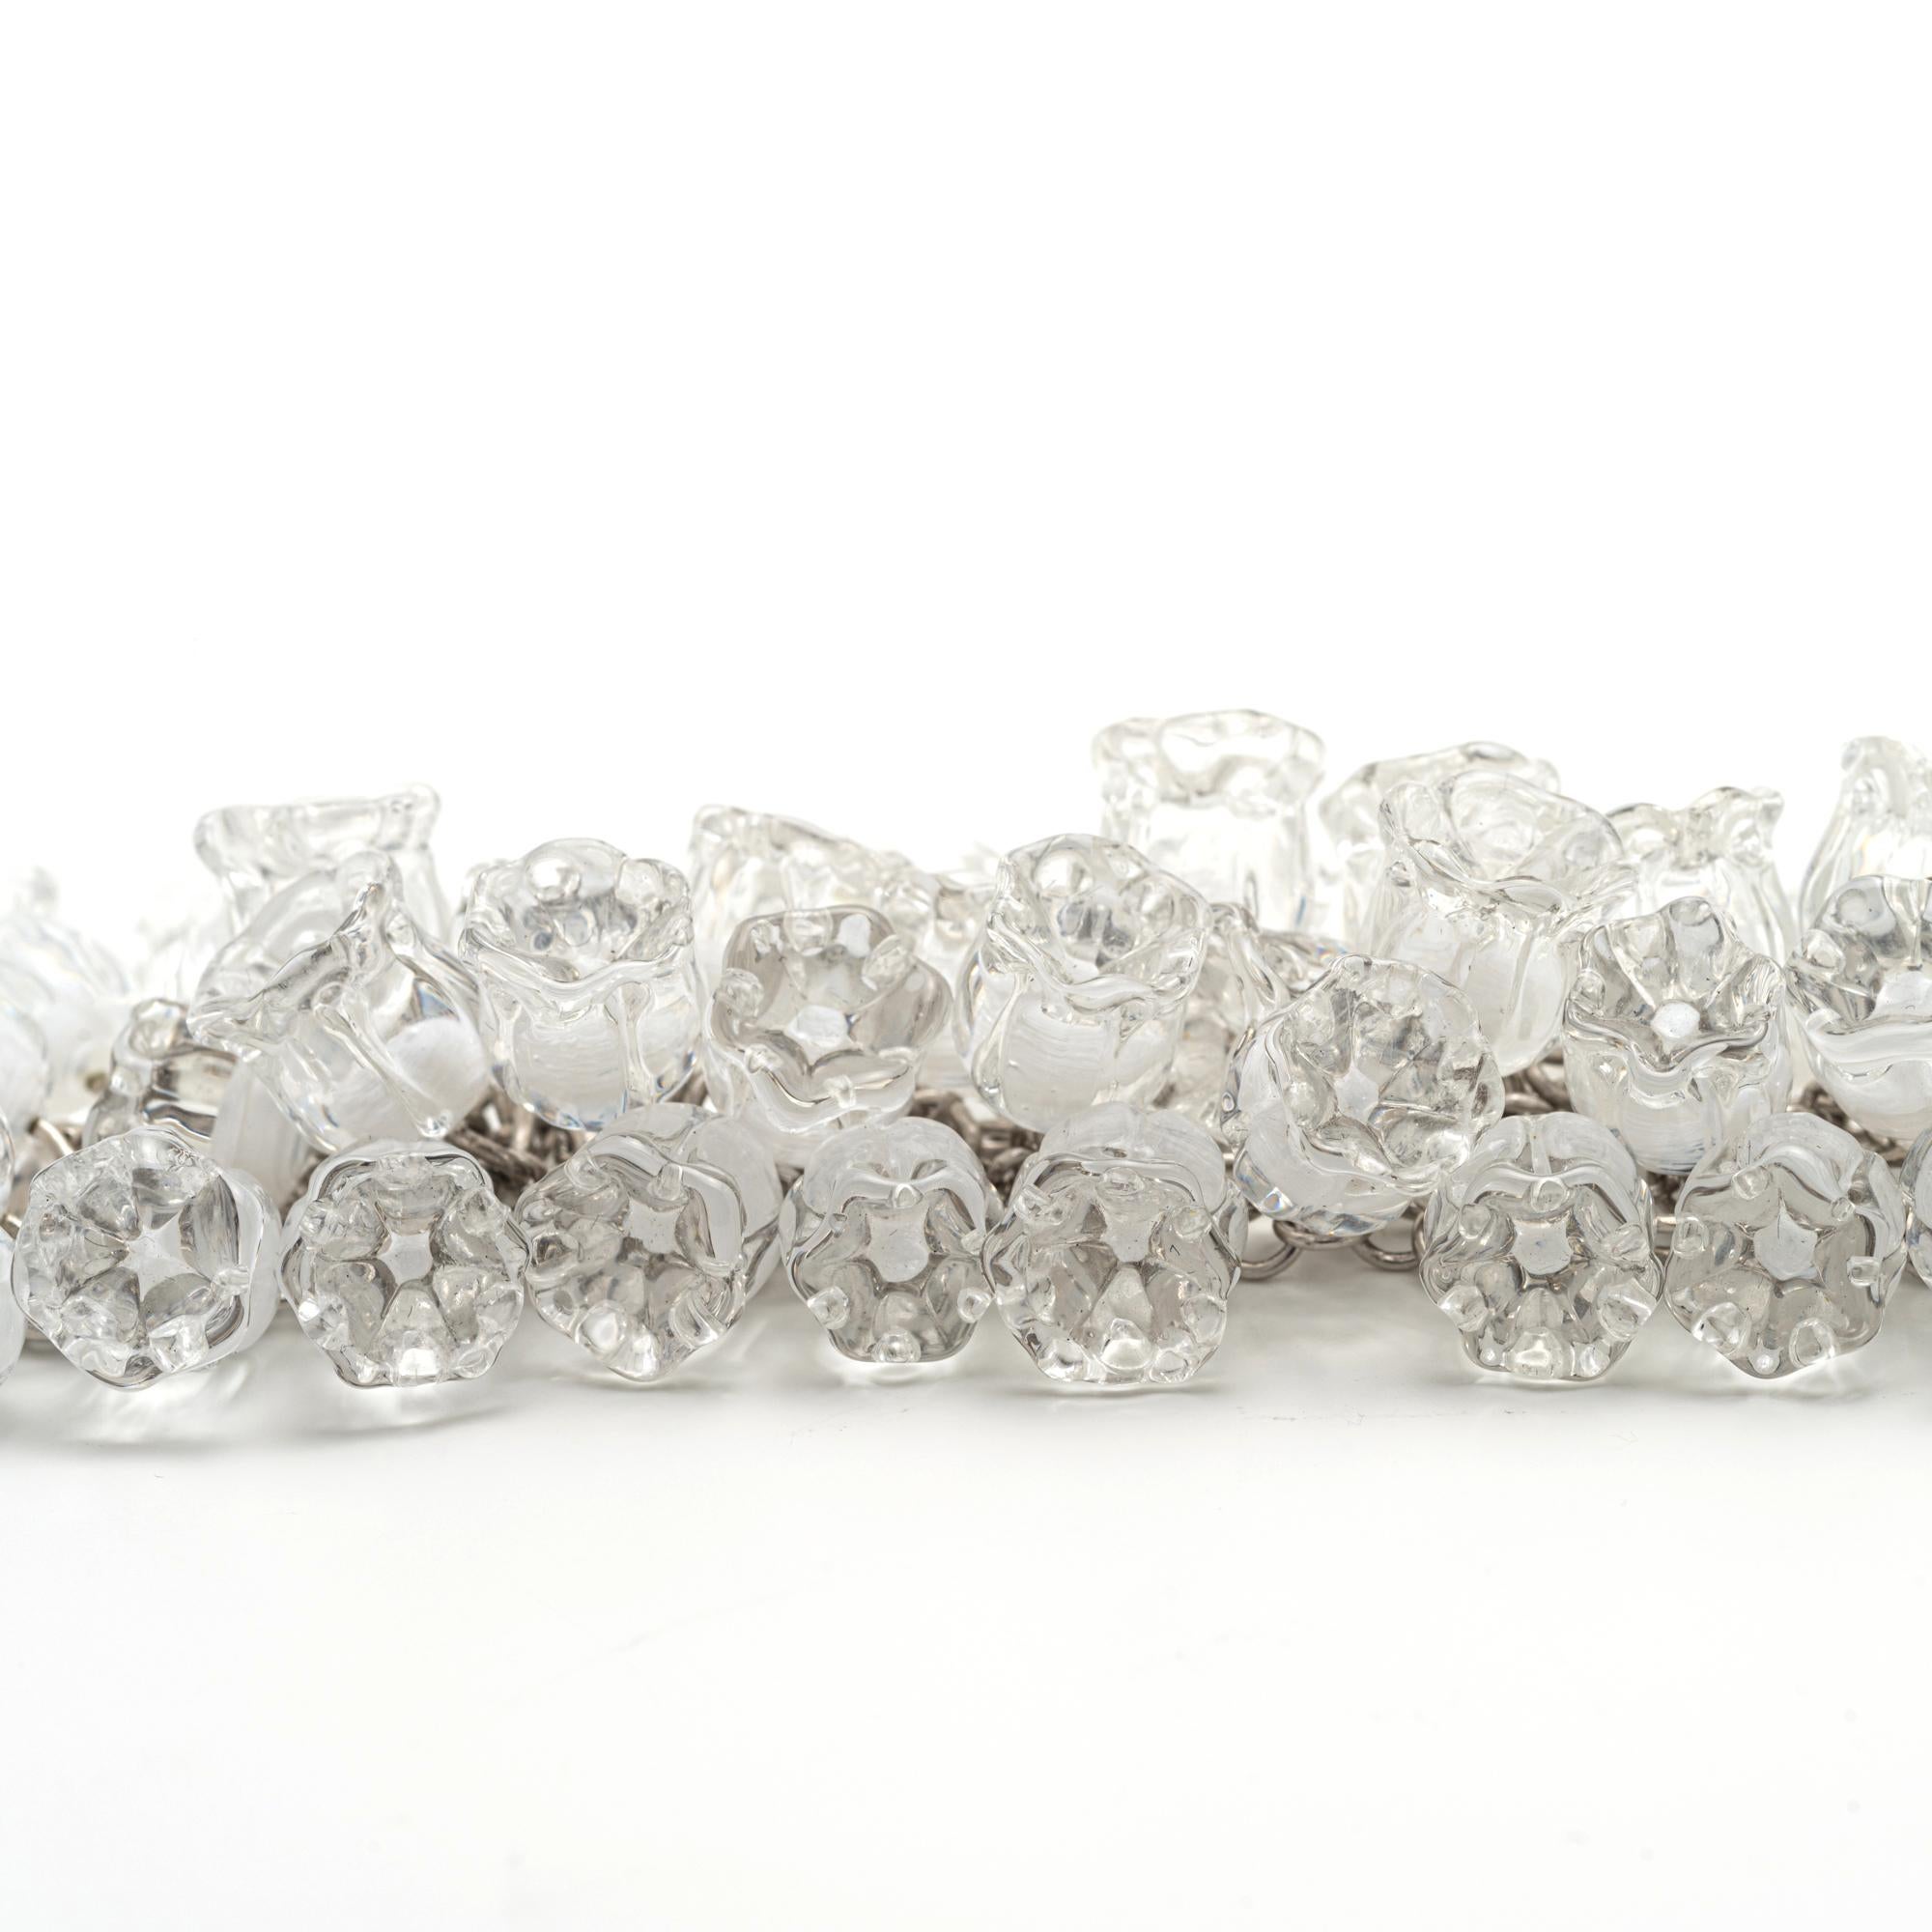 Vintage Lalique Crystal Bracelet Muguet Lily of the Valley
The four rows featuring blooming crystal beads, length 6-8 inches, signed Lalique